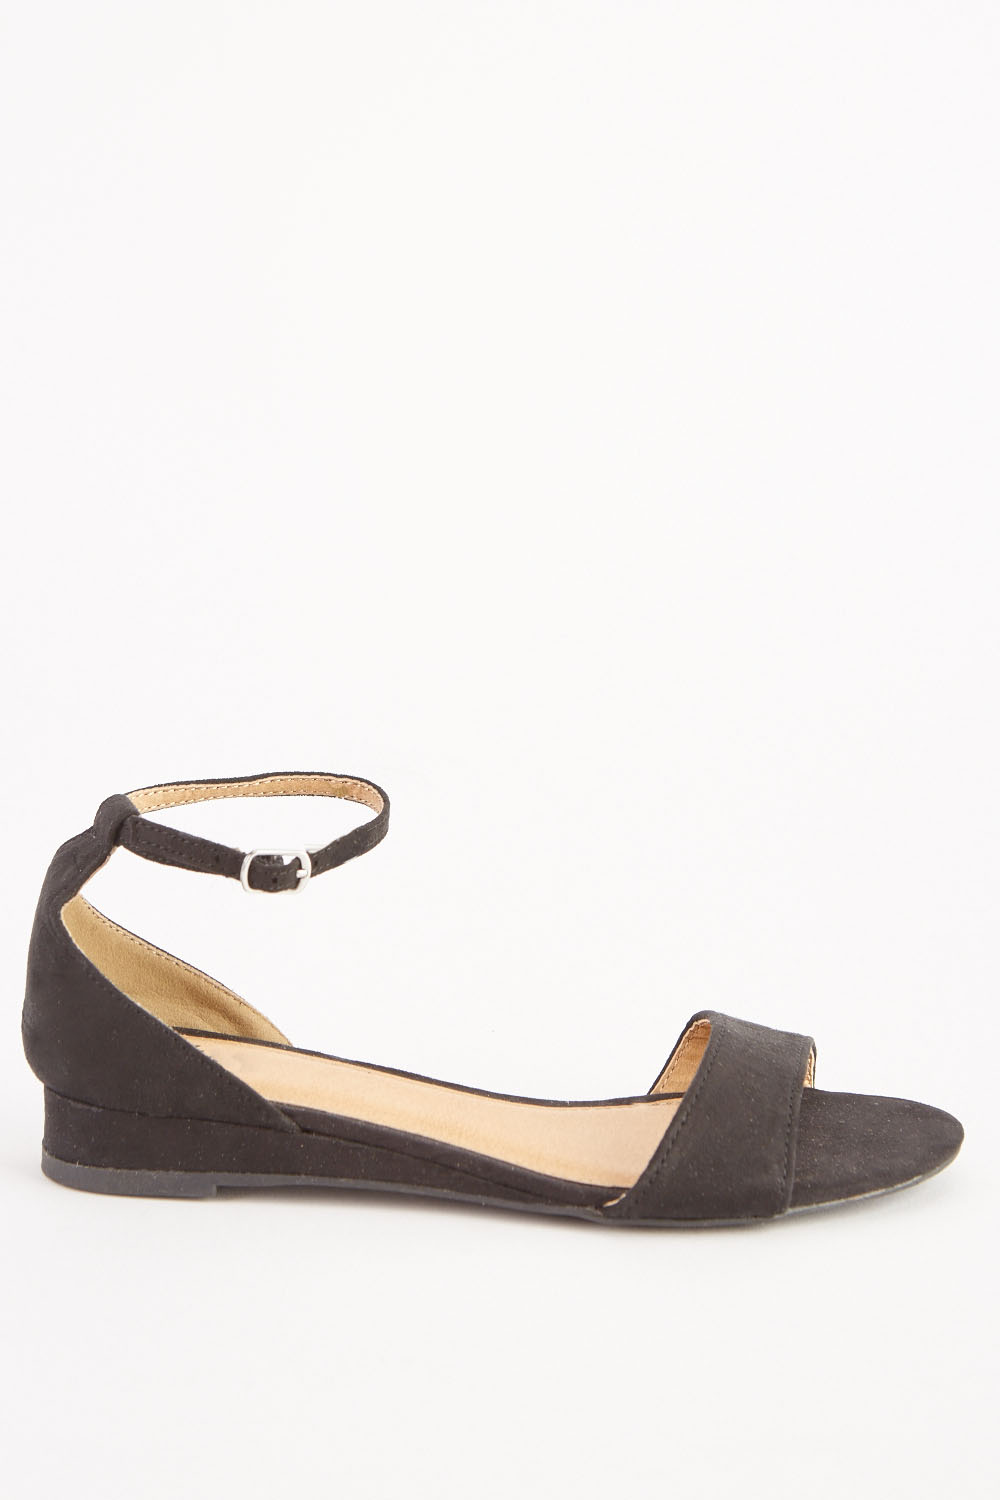 low black wedges with ankle strap